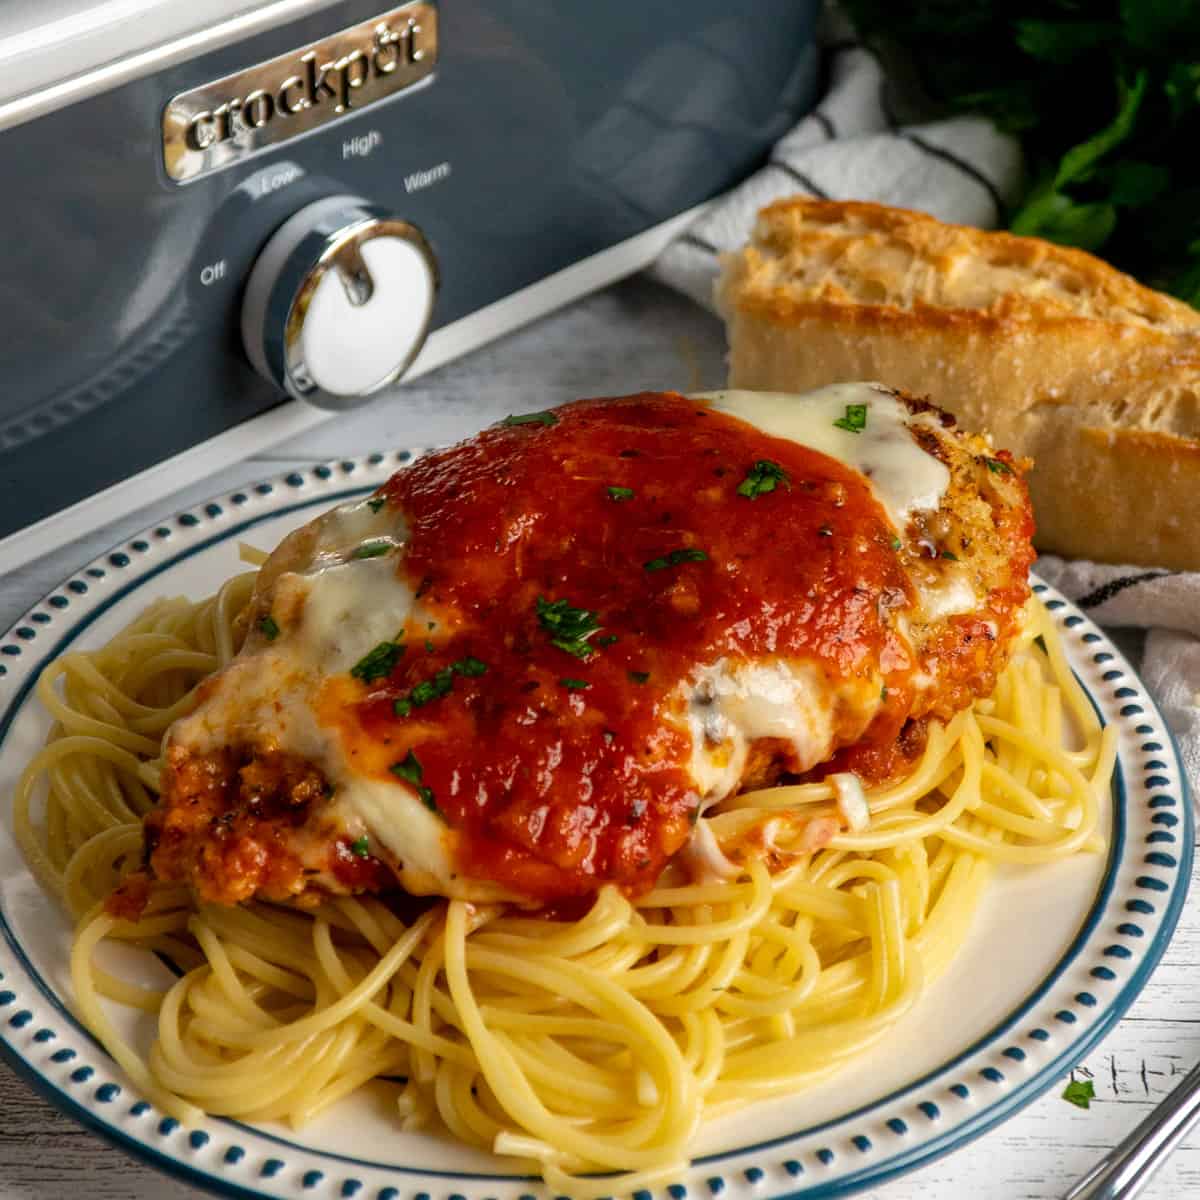 Parmesan chicken over a plate of spaghetti